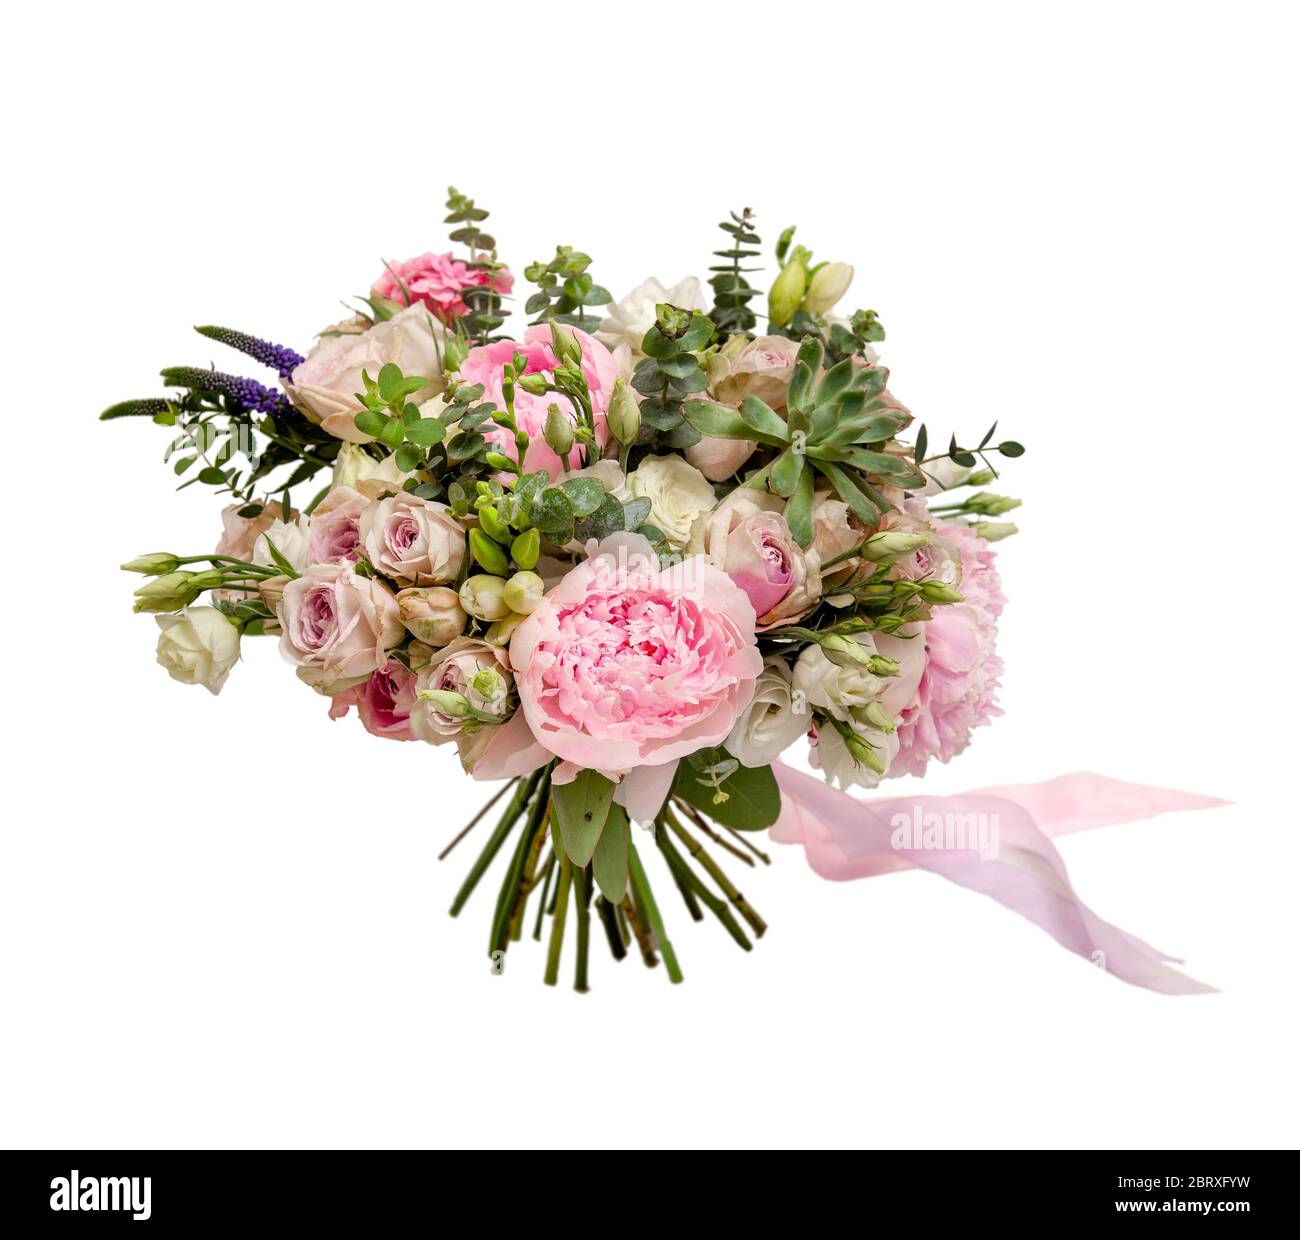 a wedding bouquet in pastel colors, consisting of roses, peonies